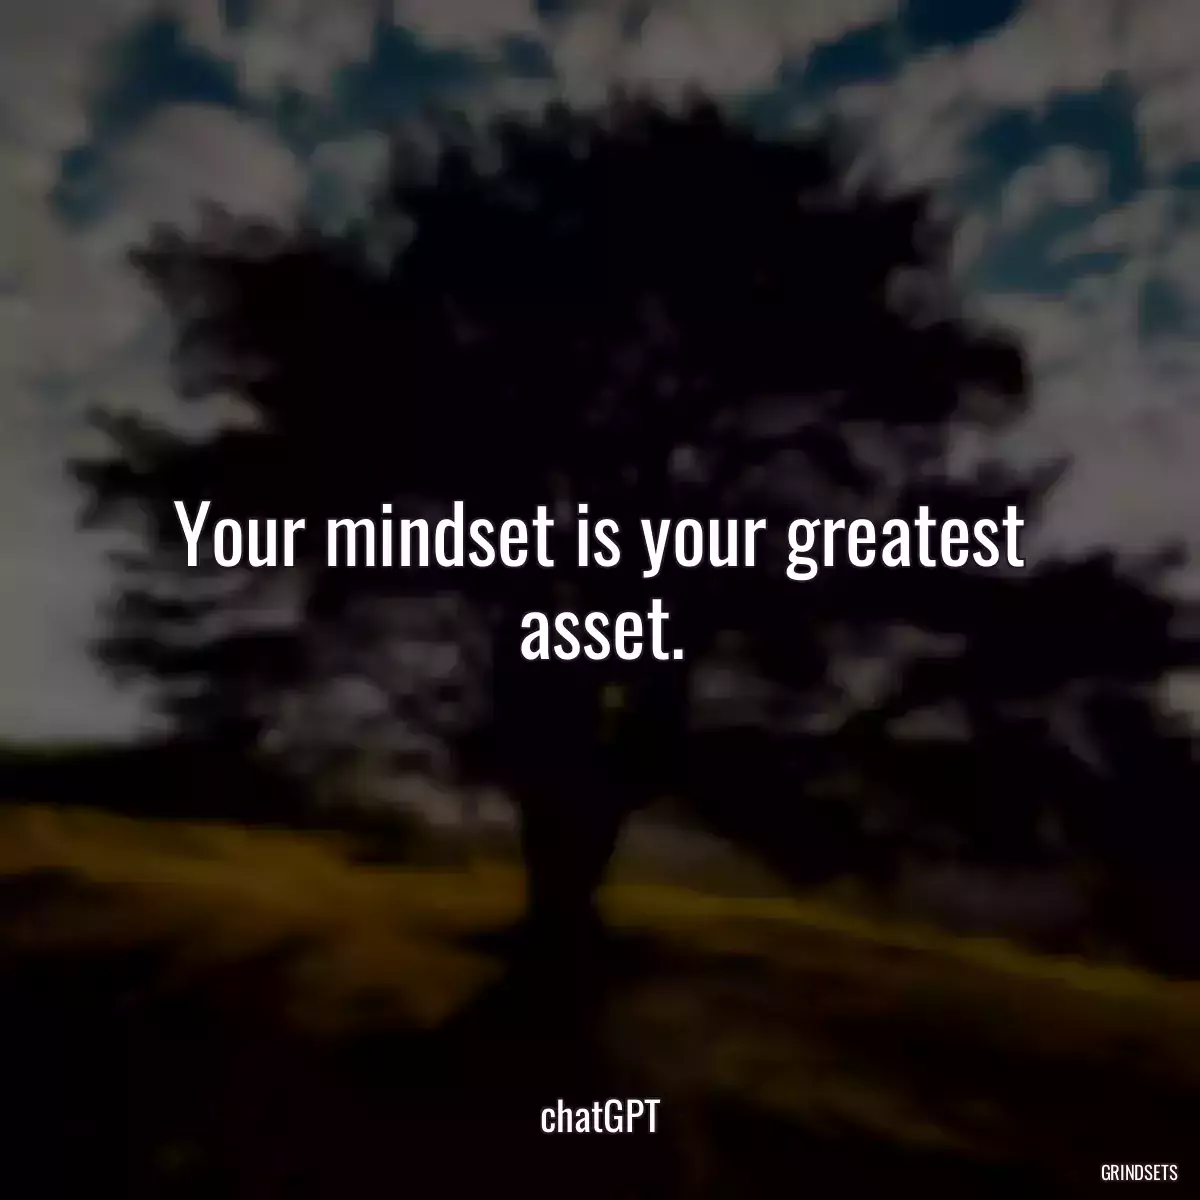 Your mindset is your greatest asset.